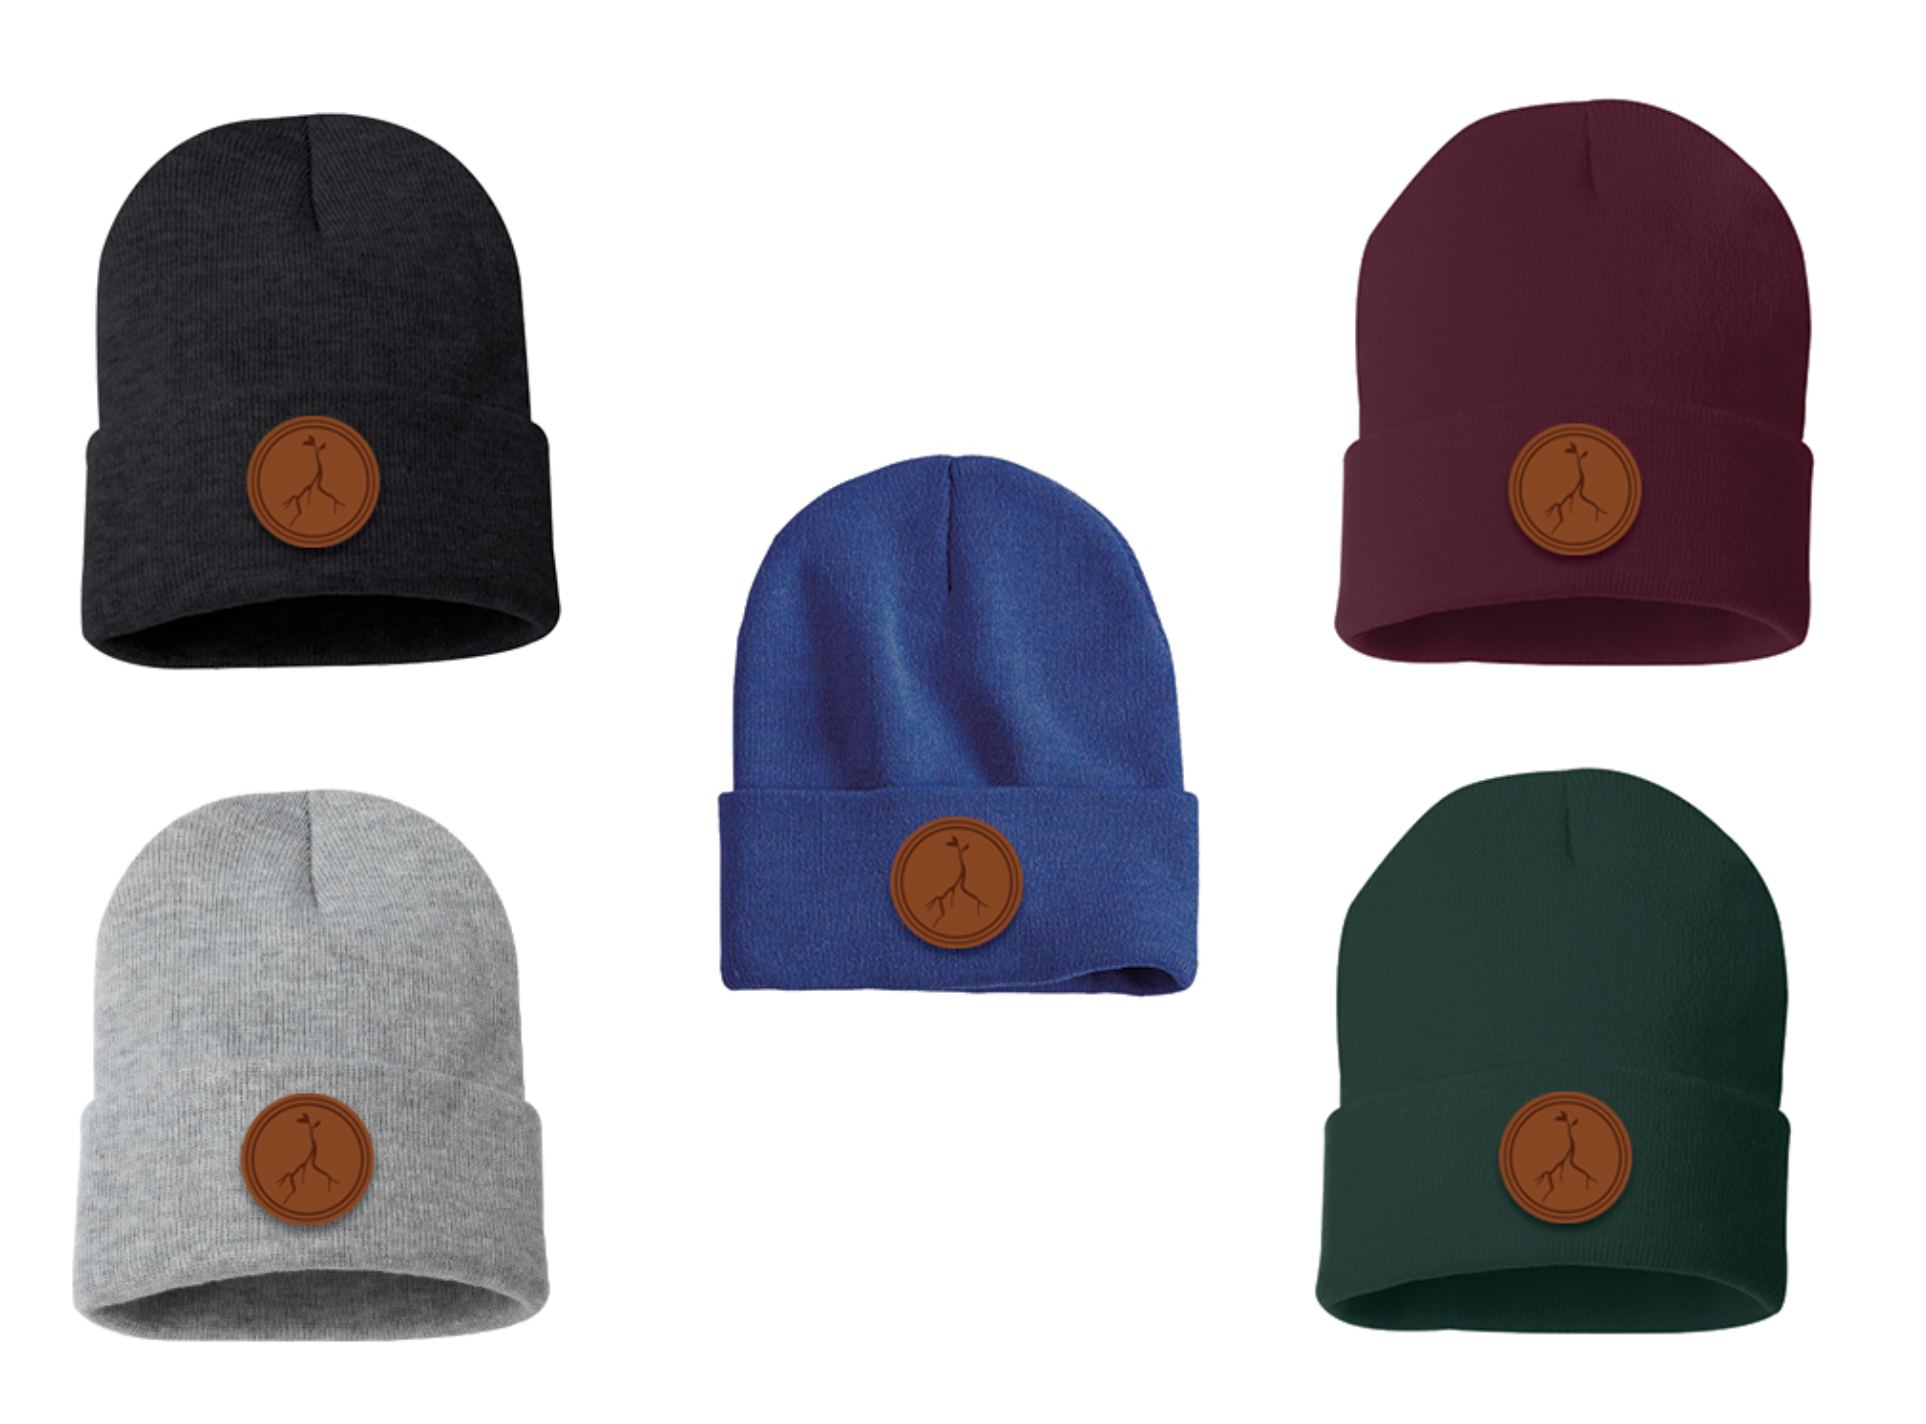 Leather Patched Beanies